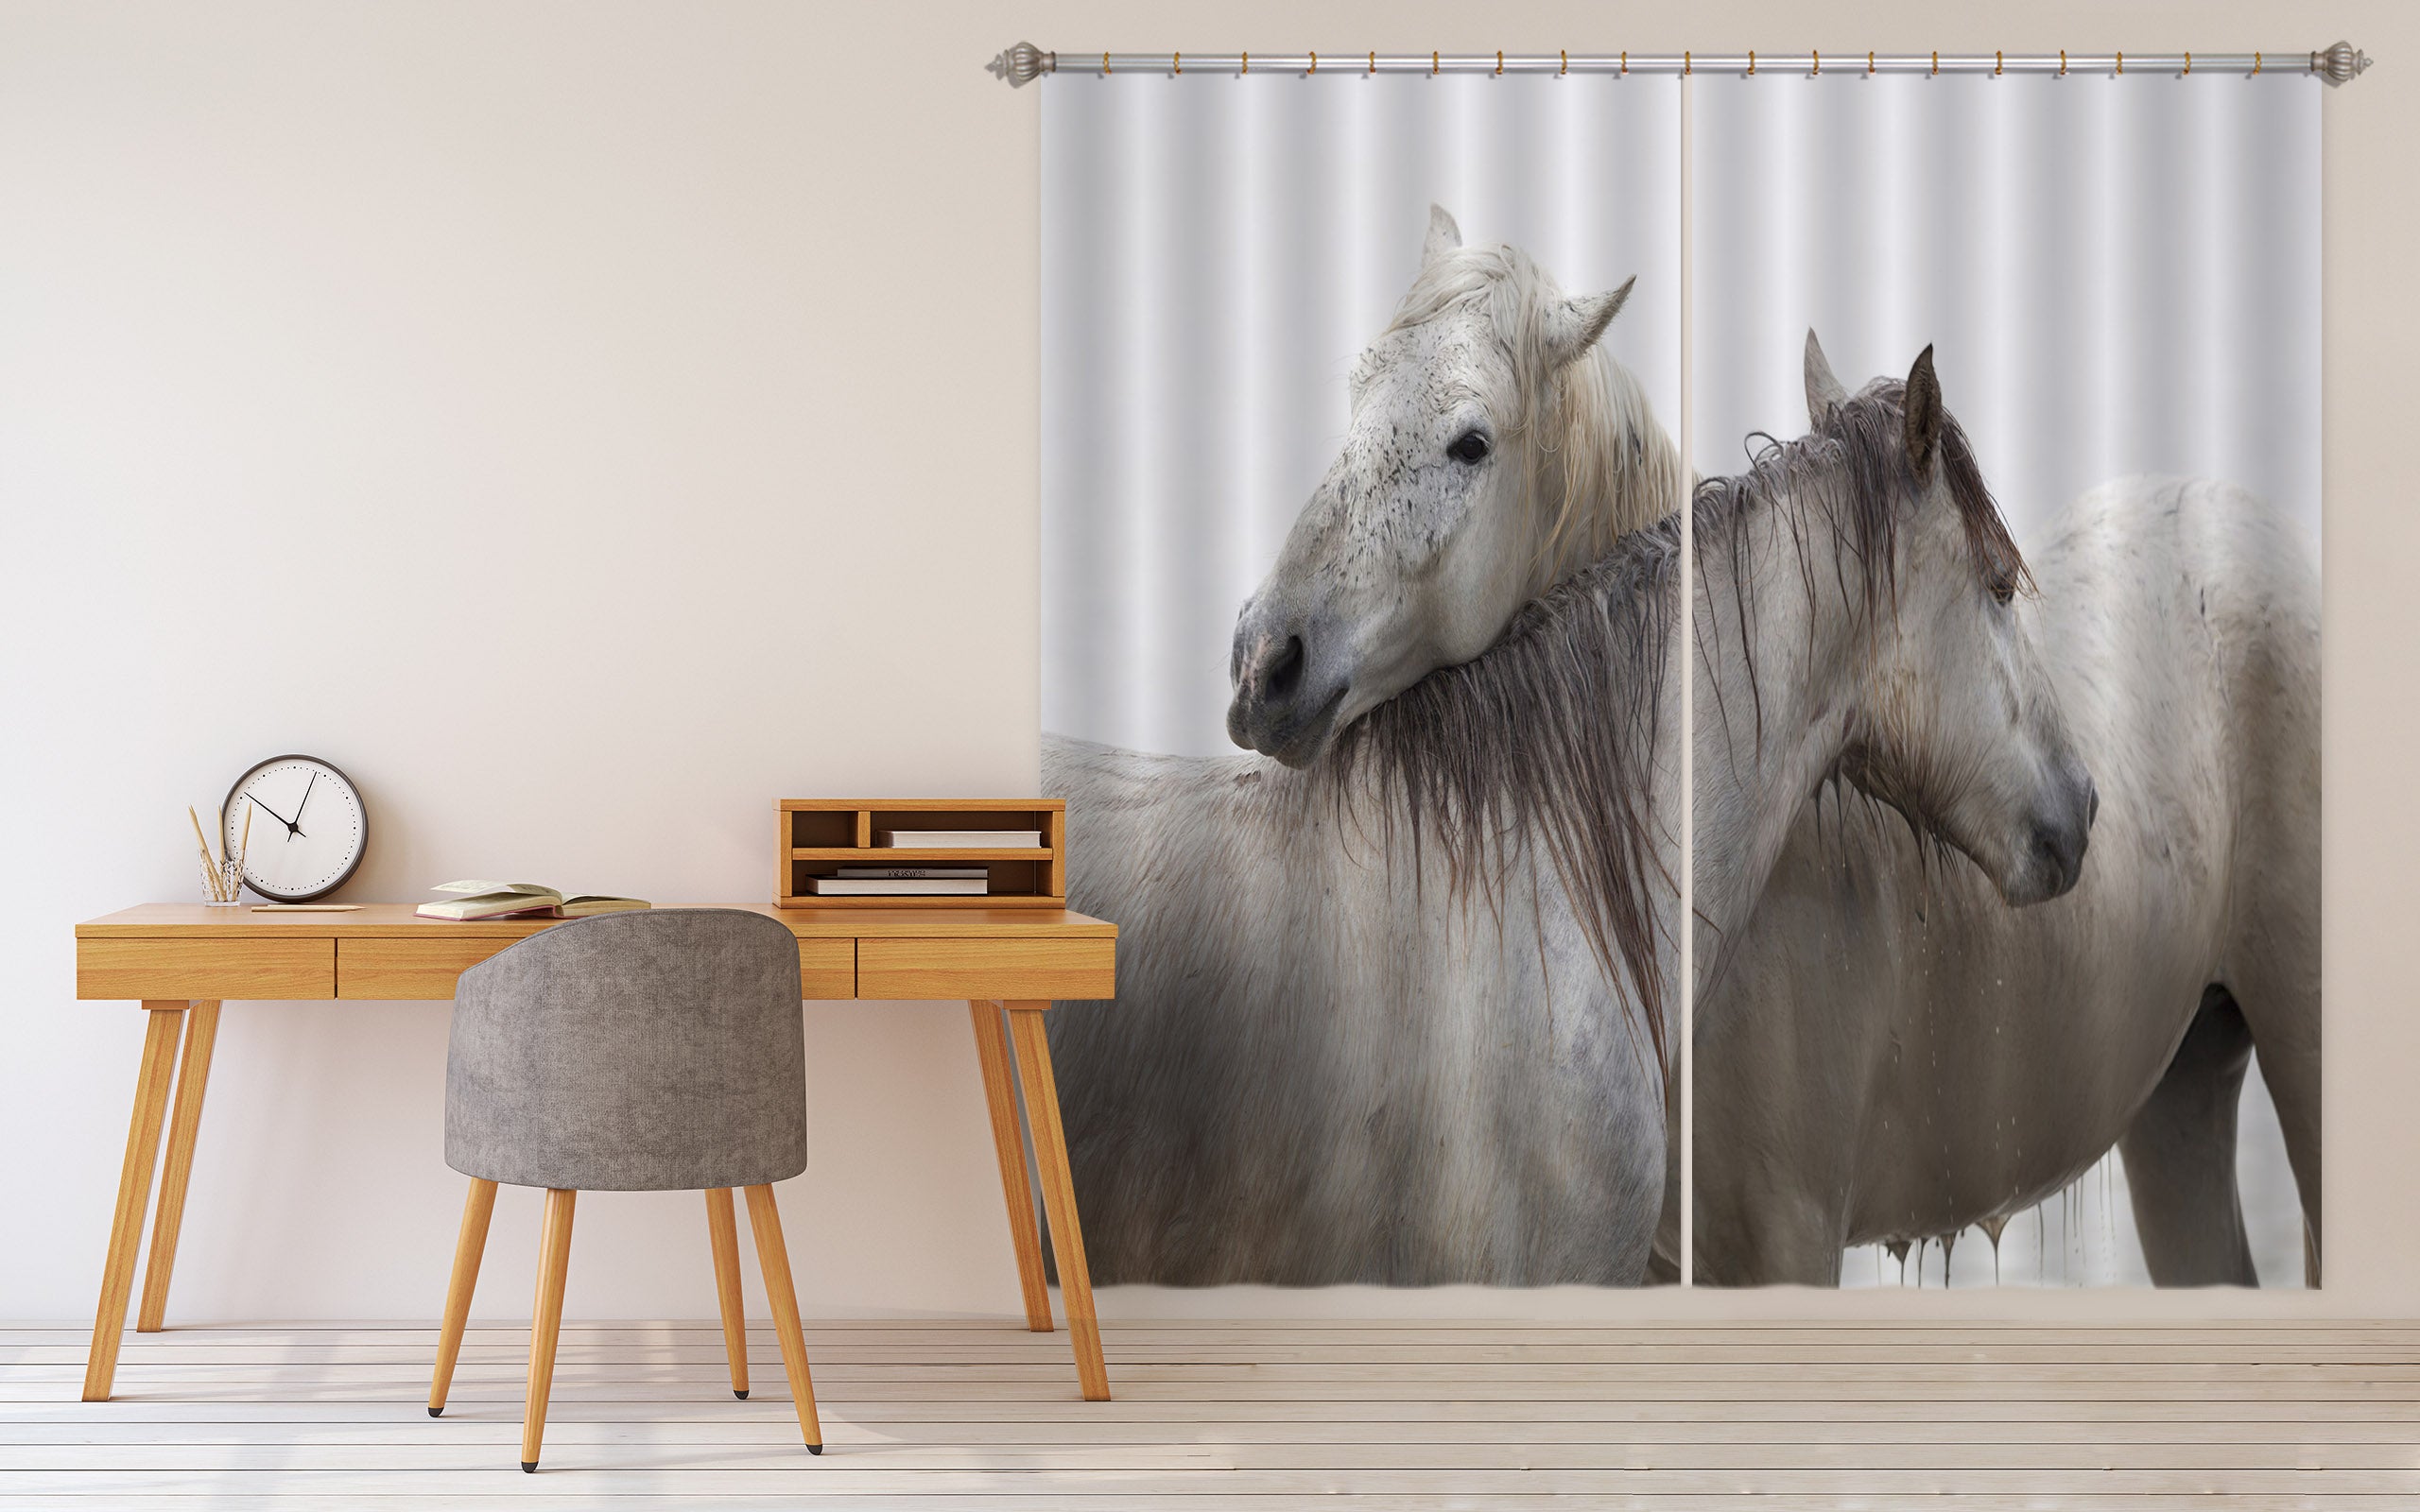 3D Two Horses 066 Marco Carmassi Curtain Curtains Drapes